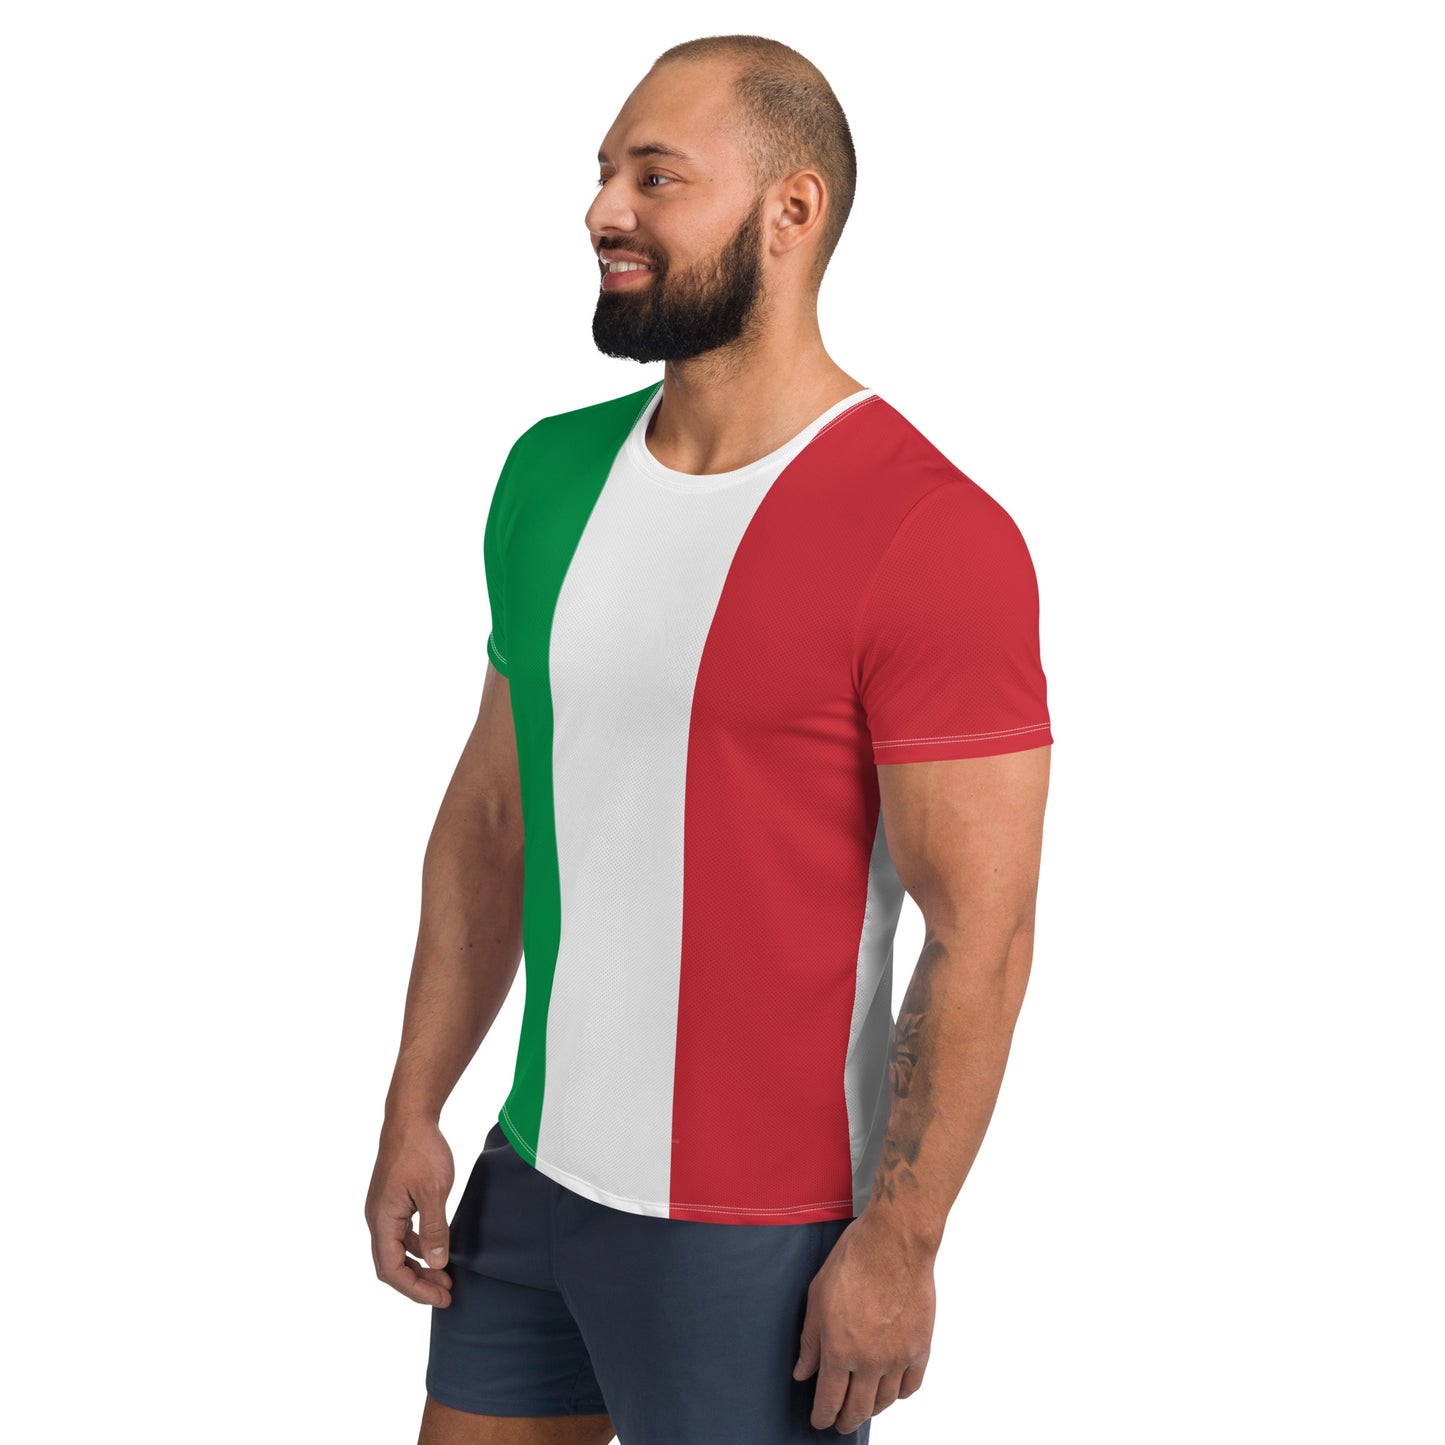 Venetian Victory Jersey: Wear Your Italian Pride with Style